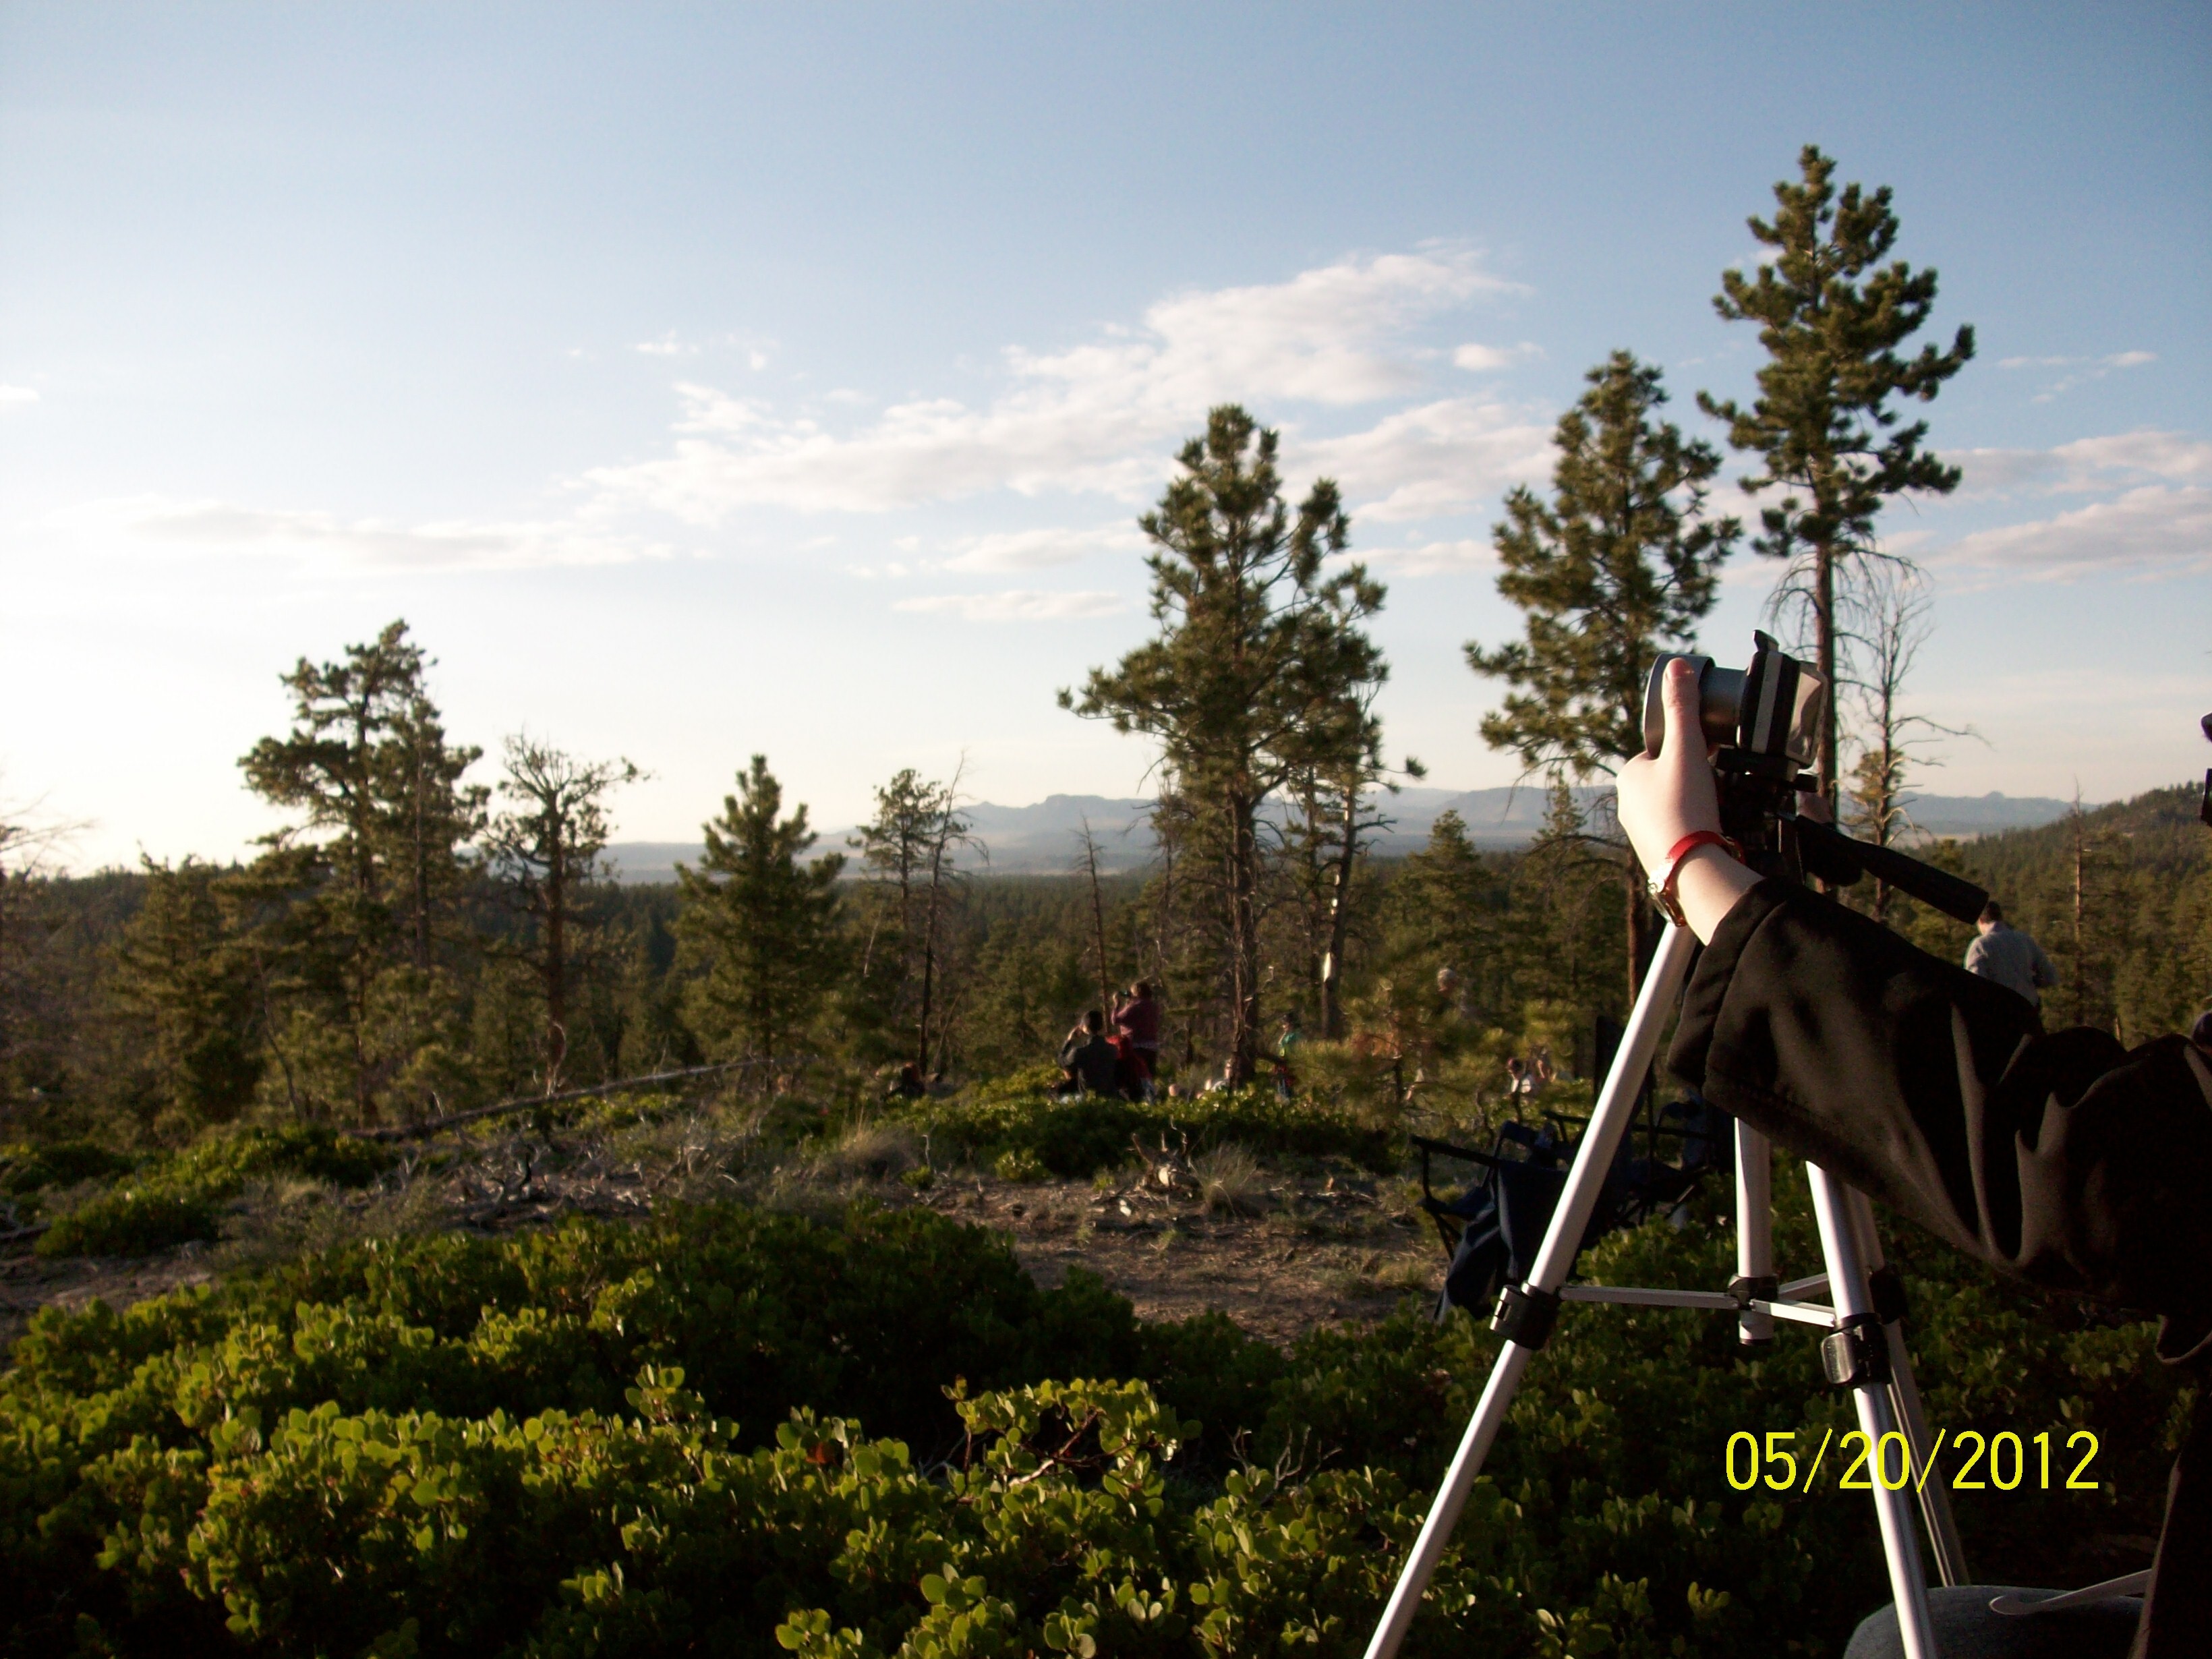 Trees line the landscape. On the right, a camera sits on a tripod. Two hands hold either side of the camera.